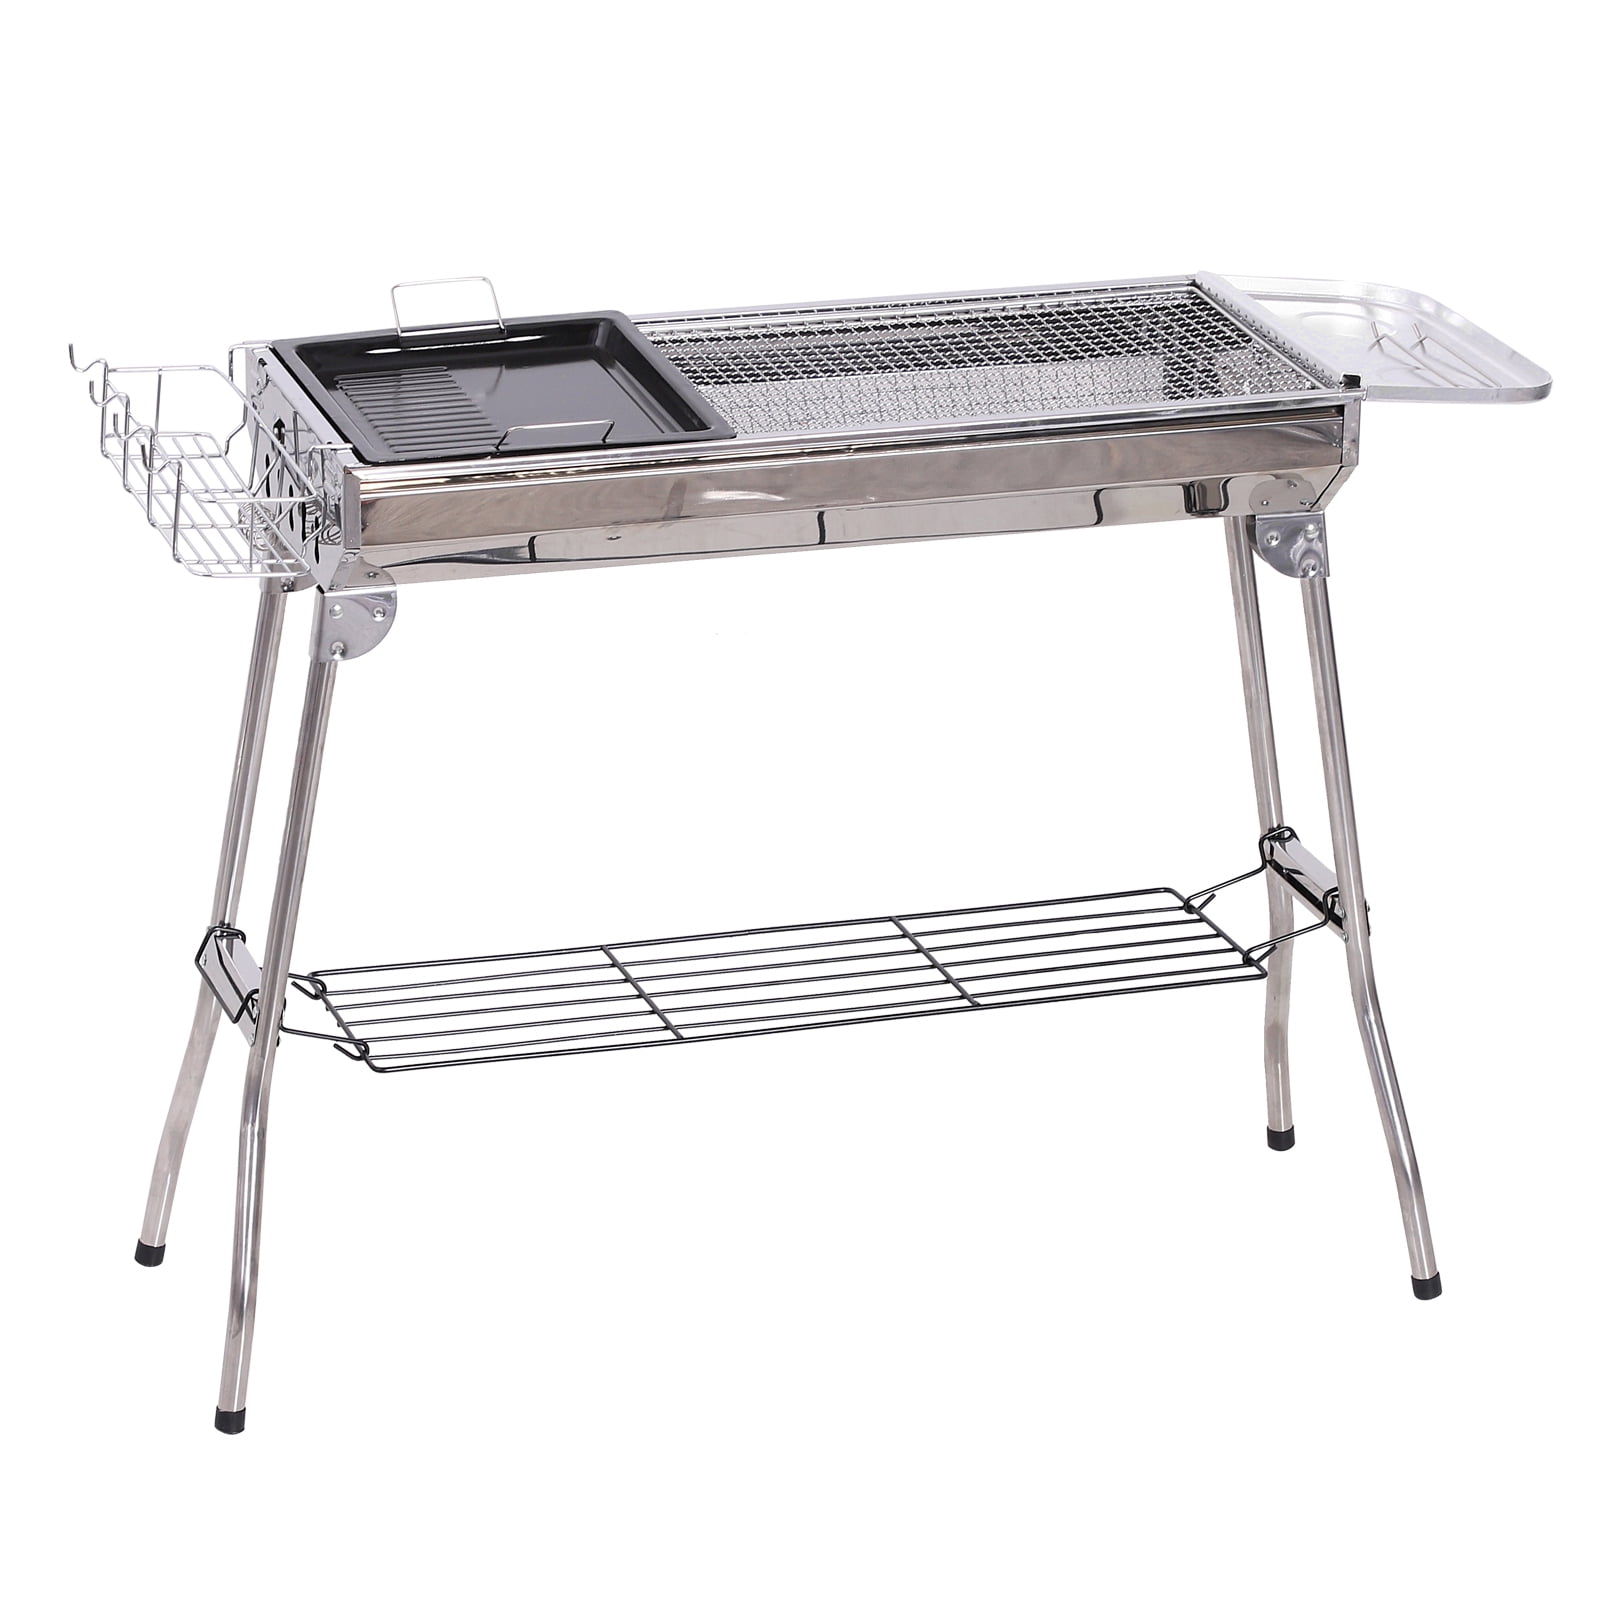 Folding Portable Barbecue Charcoal Grill, Barbecue Desk Tabletop Outdoor  Stainless Steel Smoker BBQ for Outdoor Cooking Camping Picnics Beach (M1)